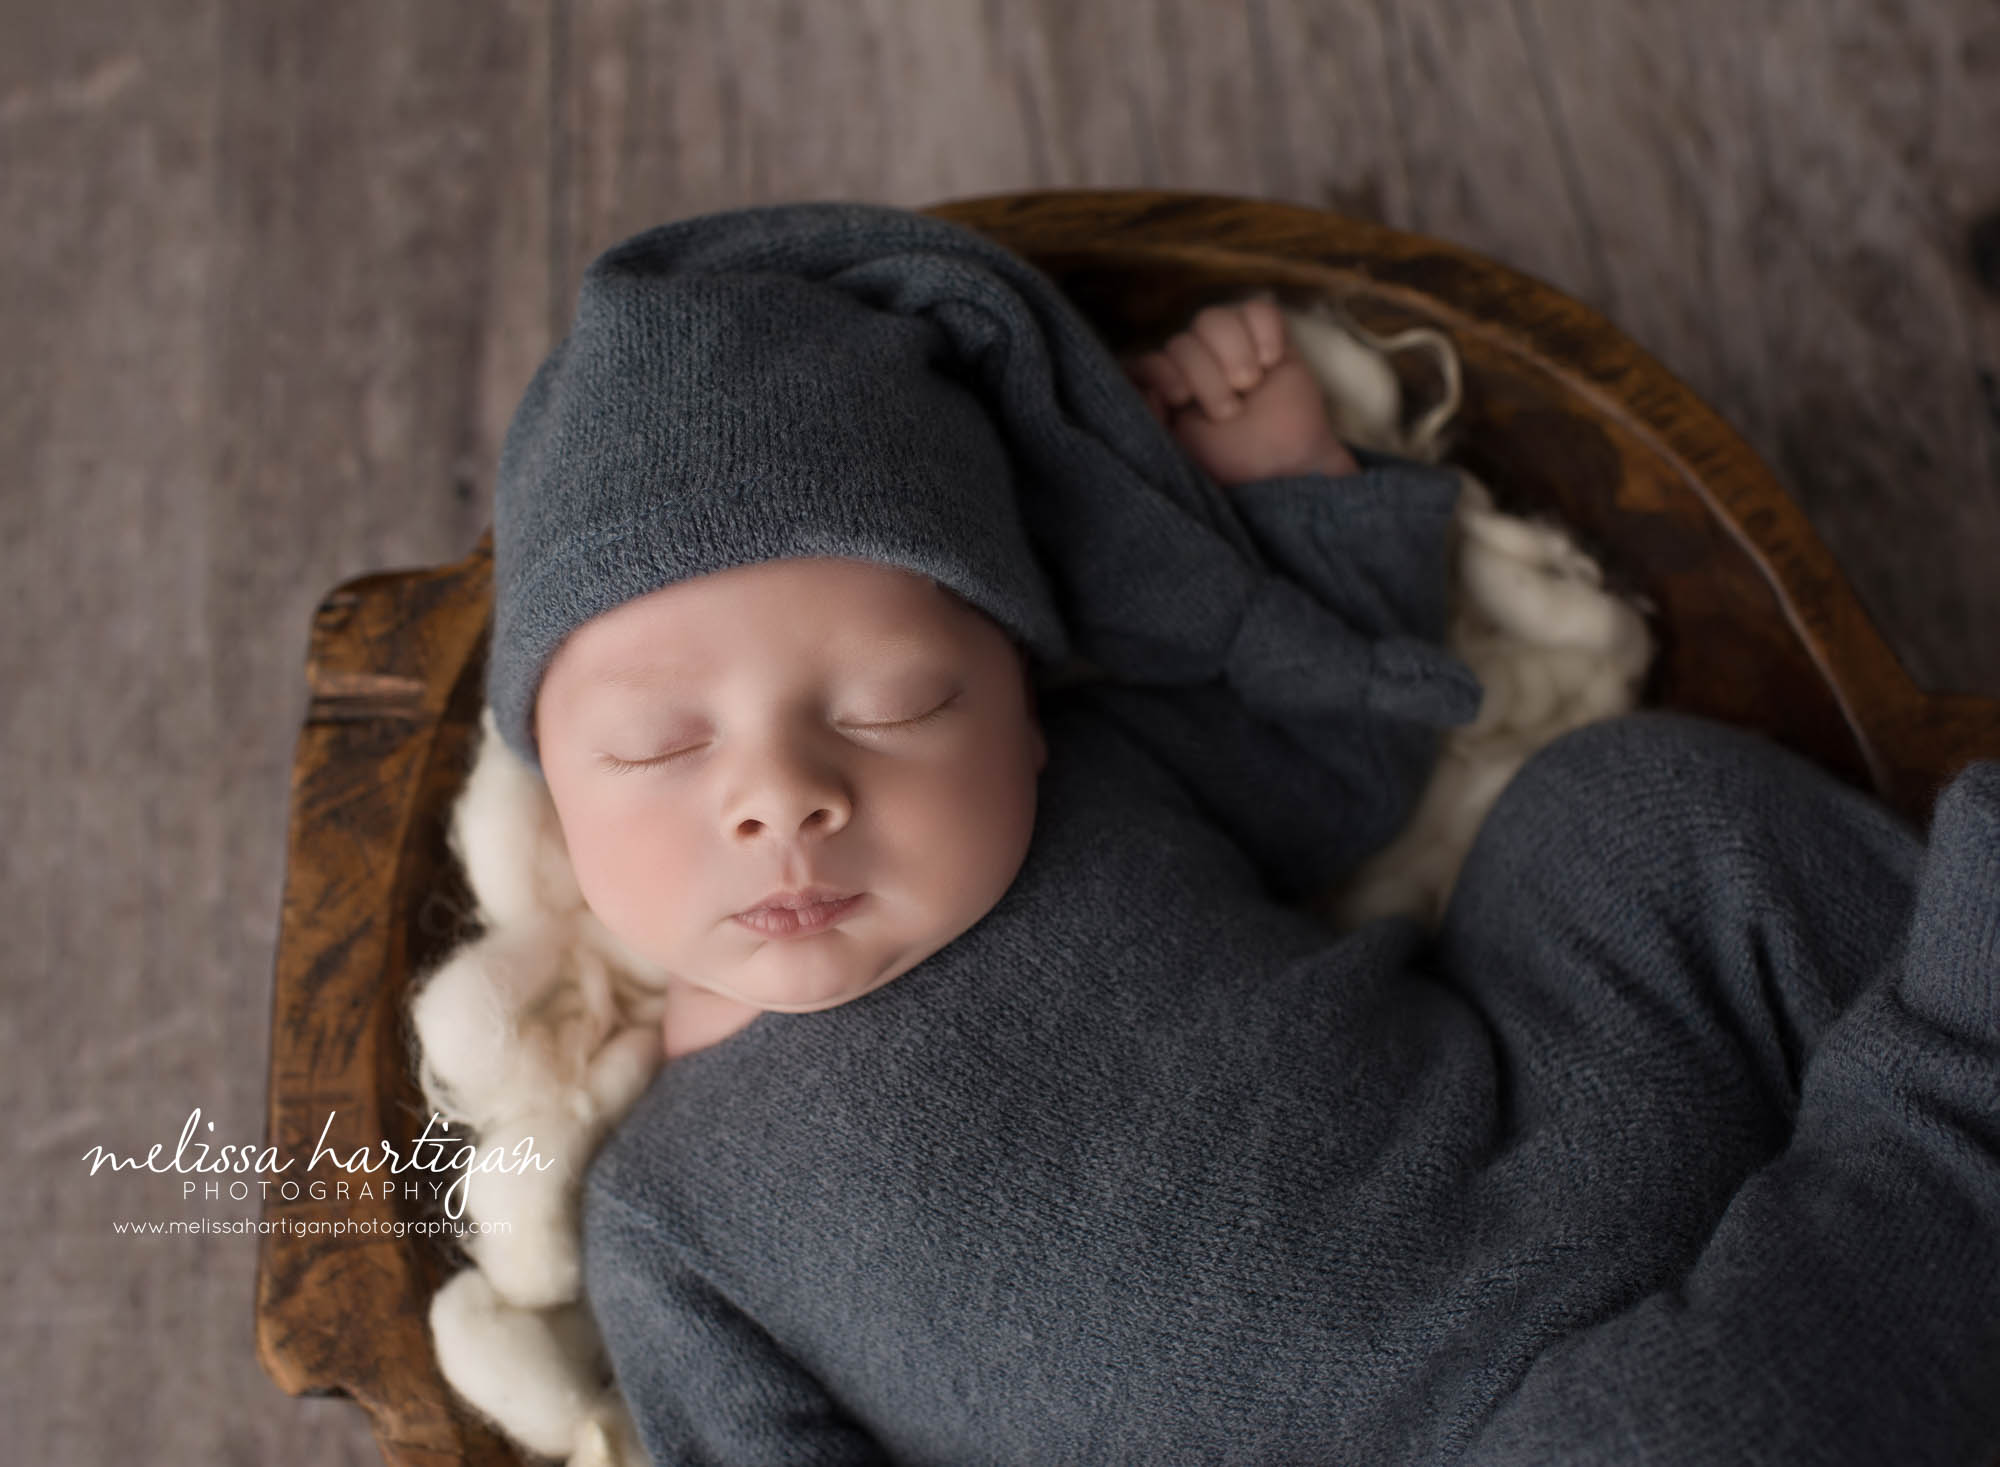 newborn baby boy posed in bowl wearing blue outfit and sleepy cap